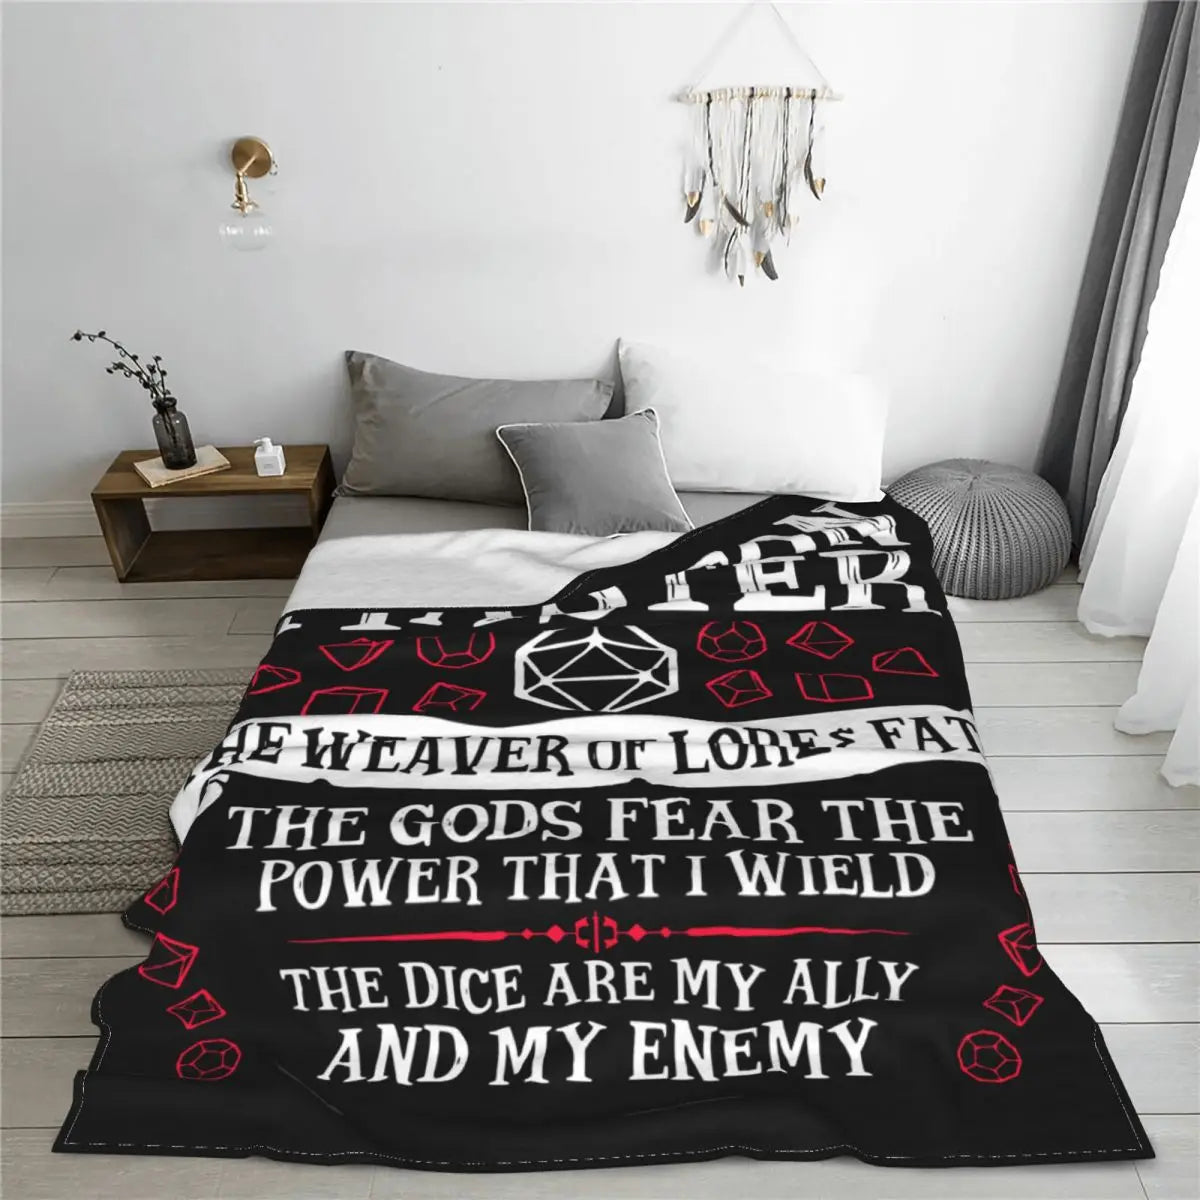 Dungeon Master The Weaver Of Lore & Fate Flannel Blanket DnD Funny Throw Blanket for Bed Sofa Couch 150*125cm Plush Thin Quilt